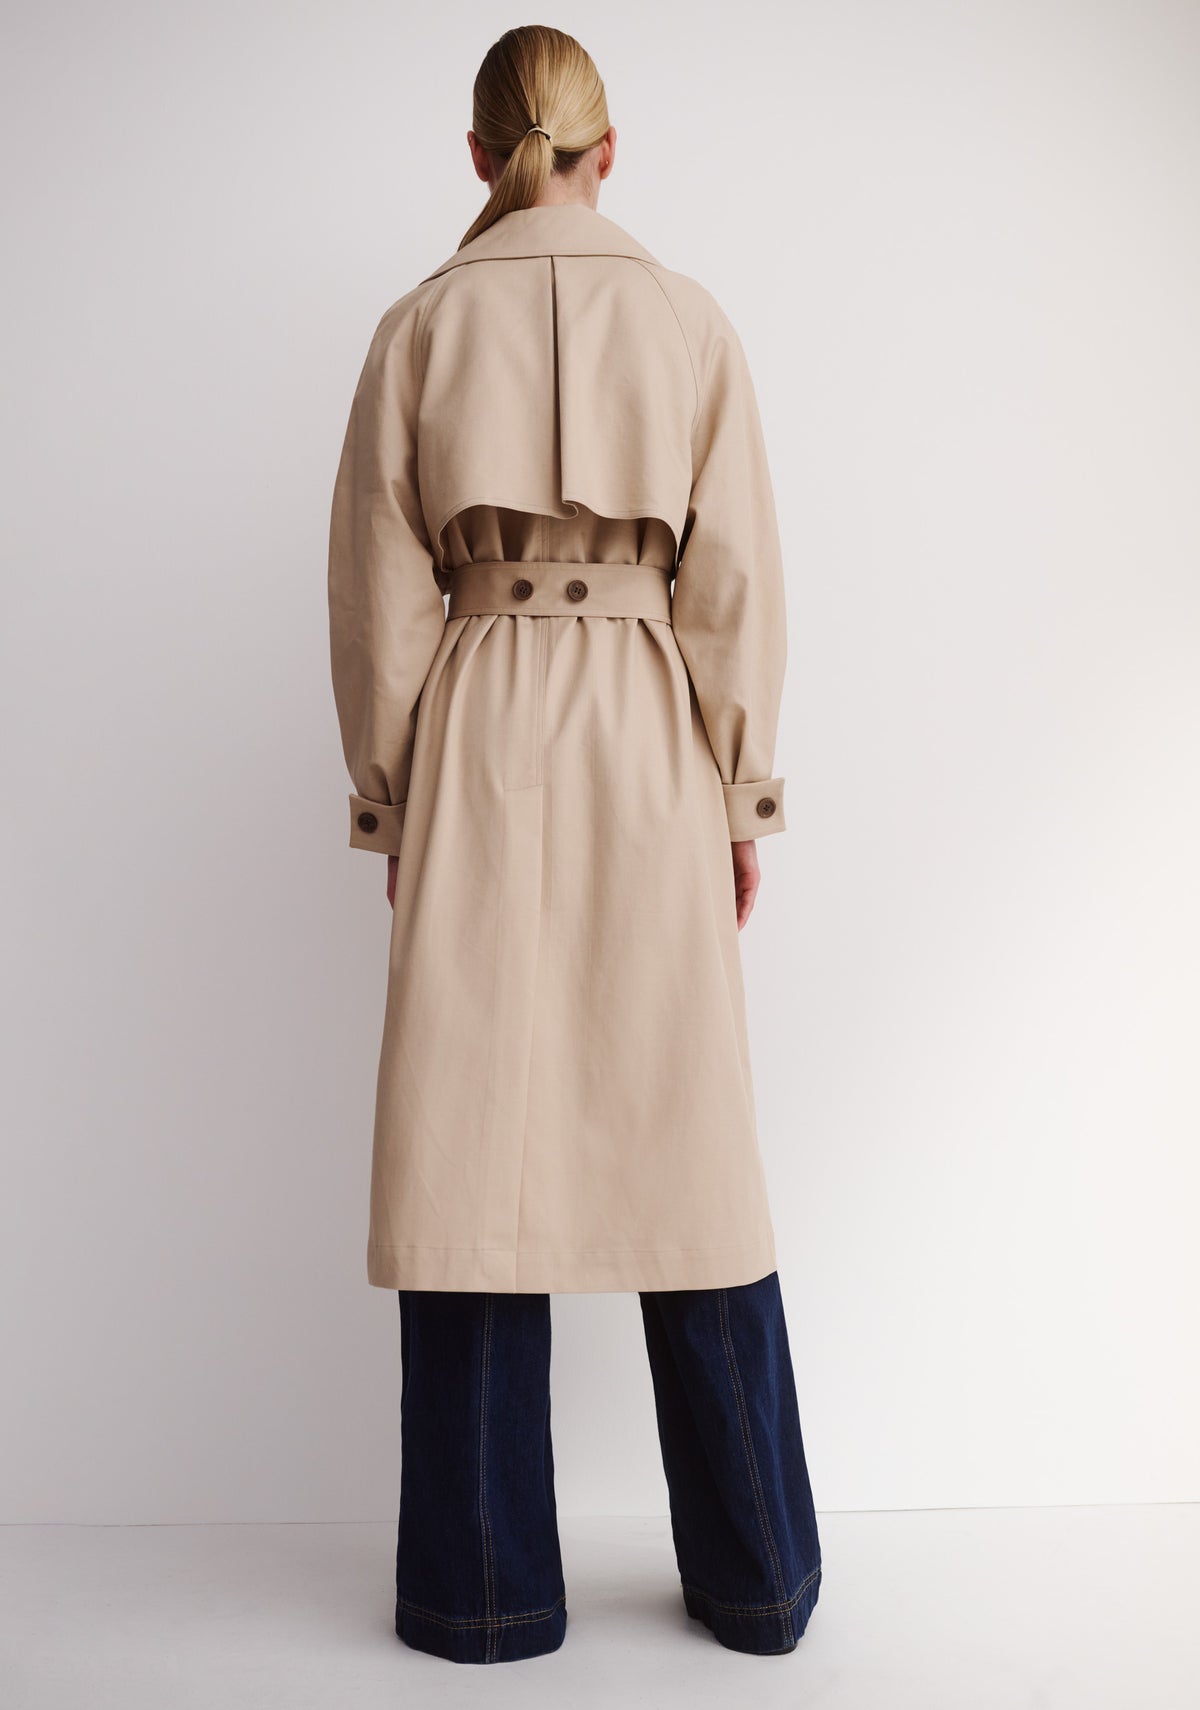 MORRISON RORY TRENCH COAT - BISCUIT